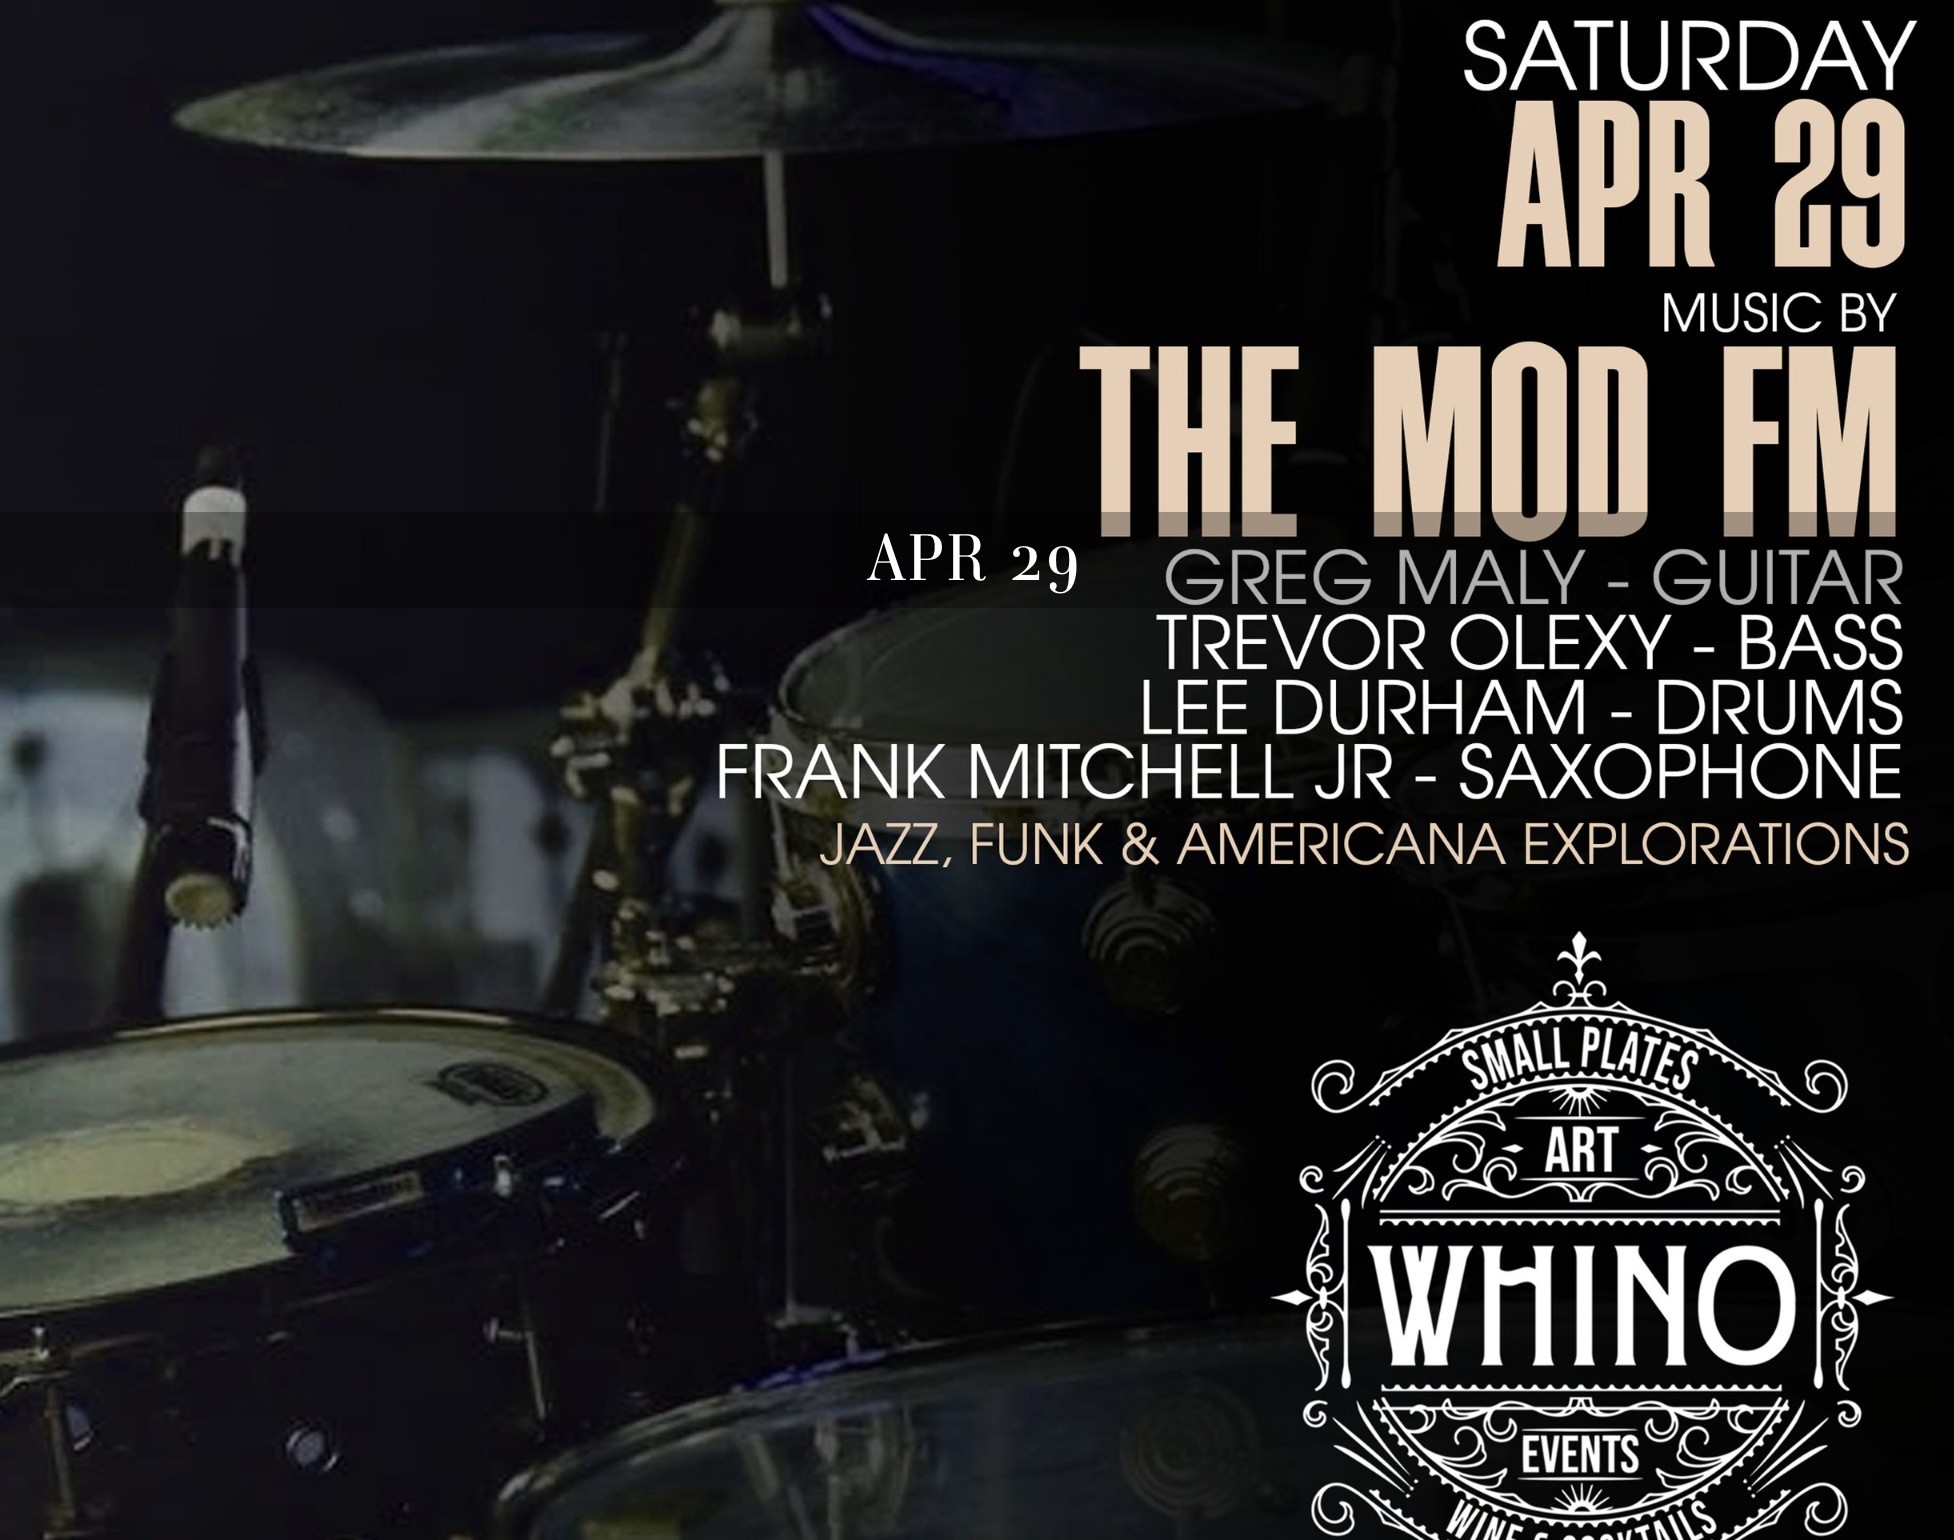 The MODfm Band, Jazz, Funk & Americana Explorations at WHINO